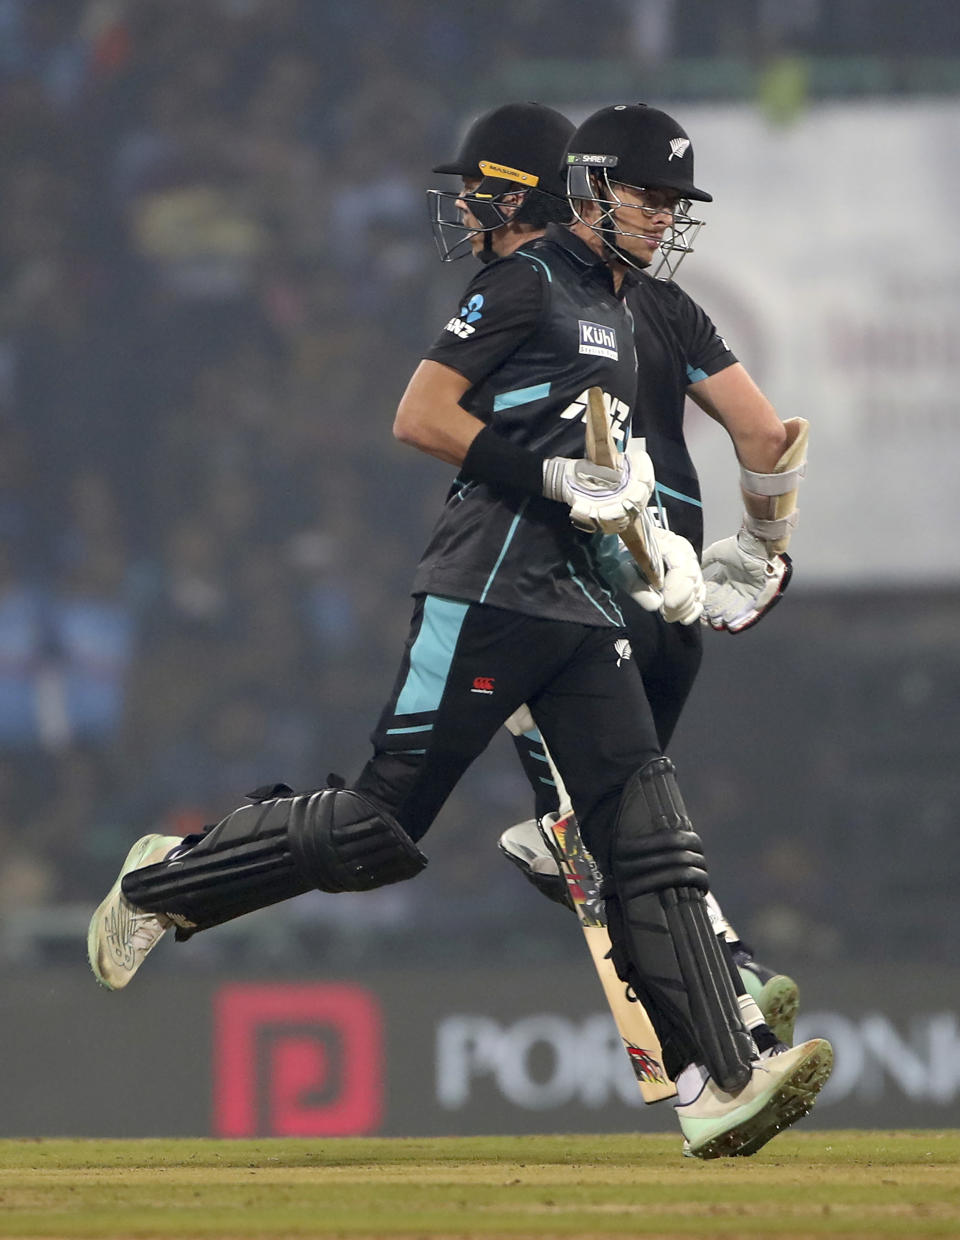 New Zealand's captain Mitchell Santner, front, and batting partner Michael Bracewell run between the wickets to score during the second T20 international cricket match between India and New Zealand in Lucknow, India, Sunday, Jan. 29, 2023. (AP Photo/Surjeet Yadav)